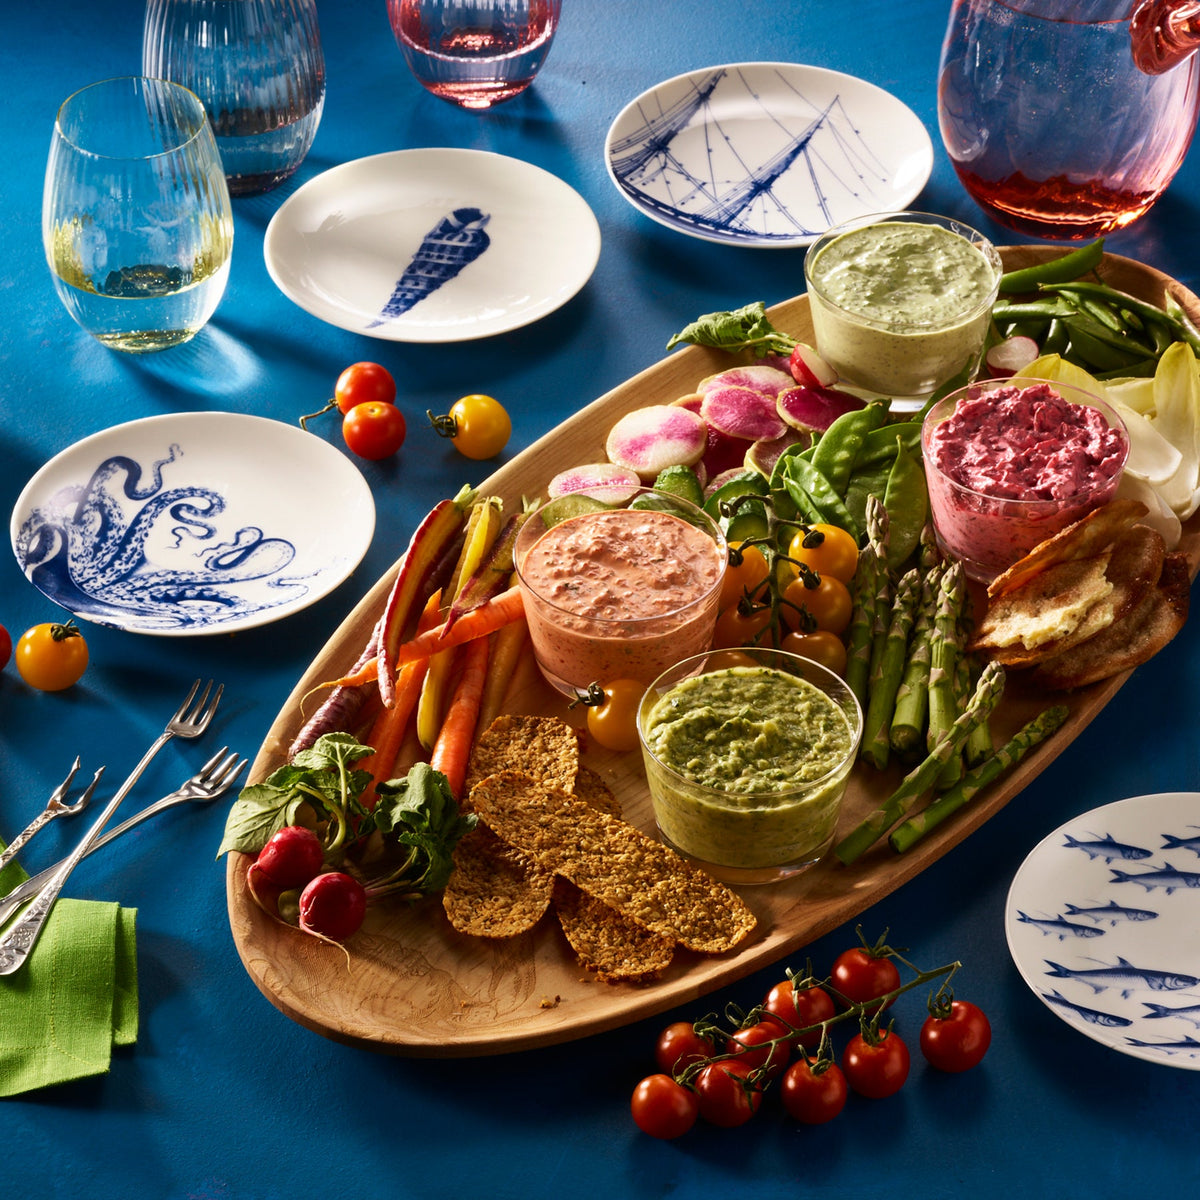 A platter of Lucy Tidbit Bowls and appetizers in glass bowls on a blue table, perfect for snack portions.